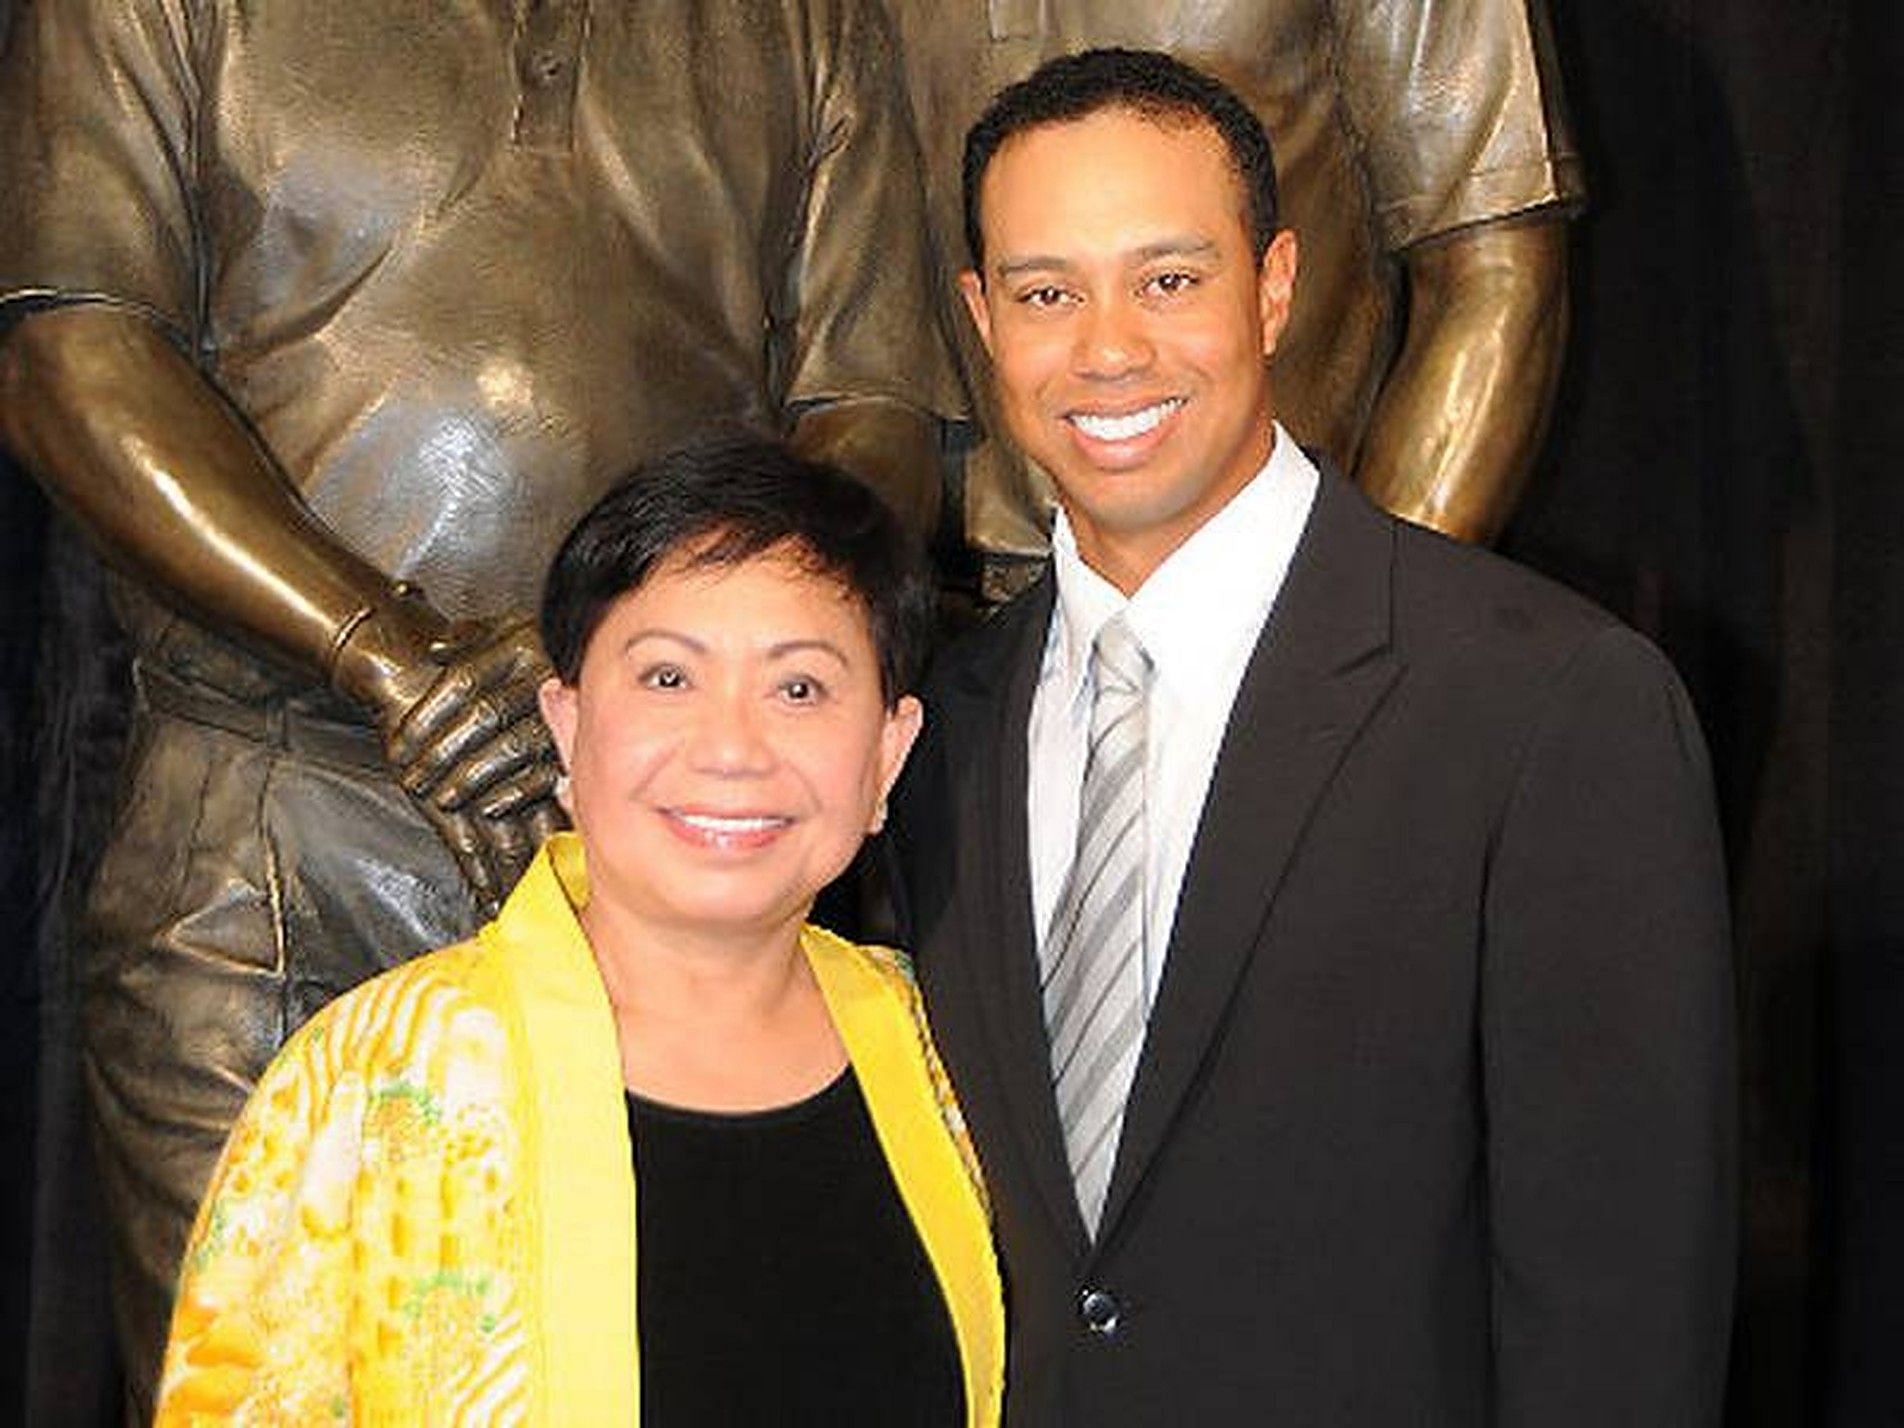 Tiger Woods with his mother (Image via WireImage/Cohen)